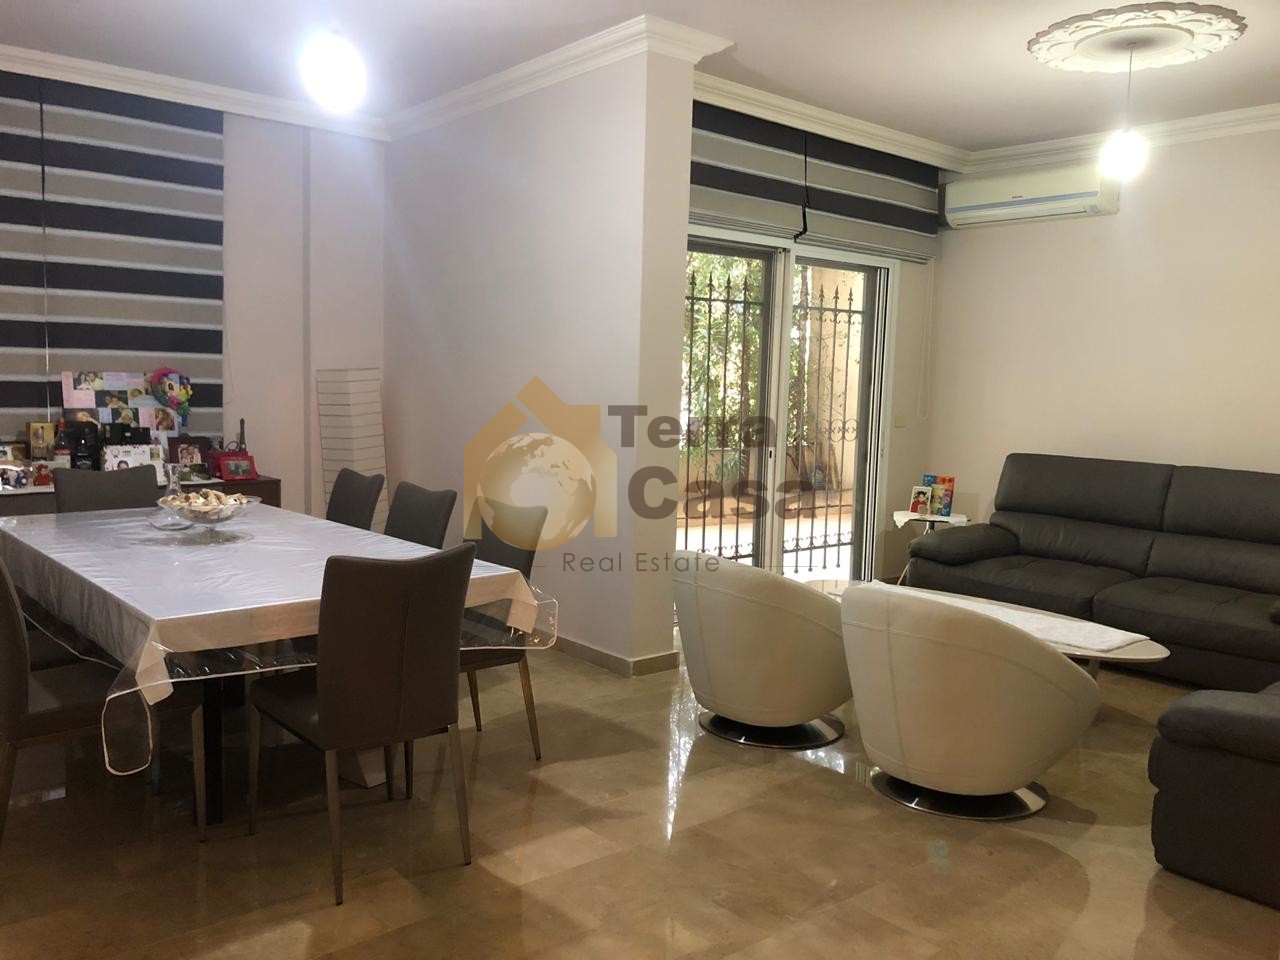 Apartment for sale in ain saade one unit per floor fully decorated with terrace and small garden.